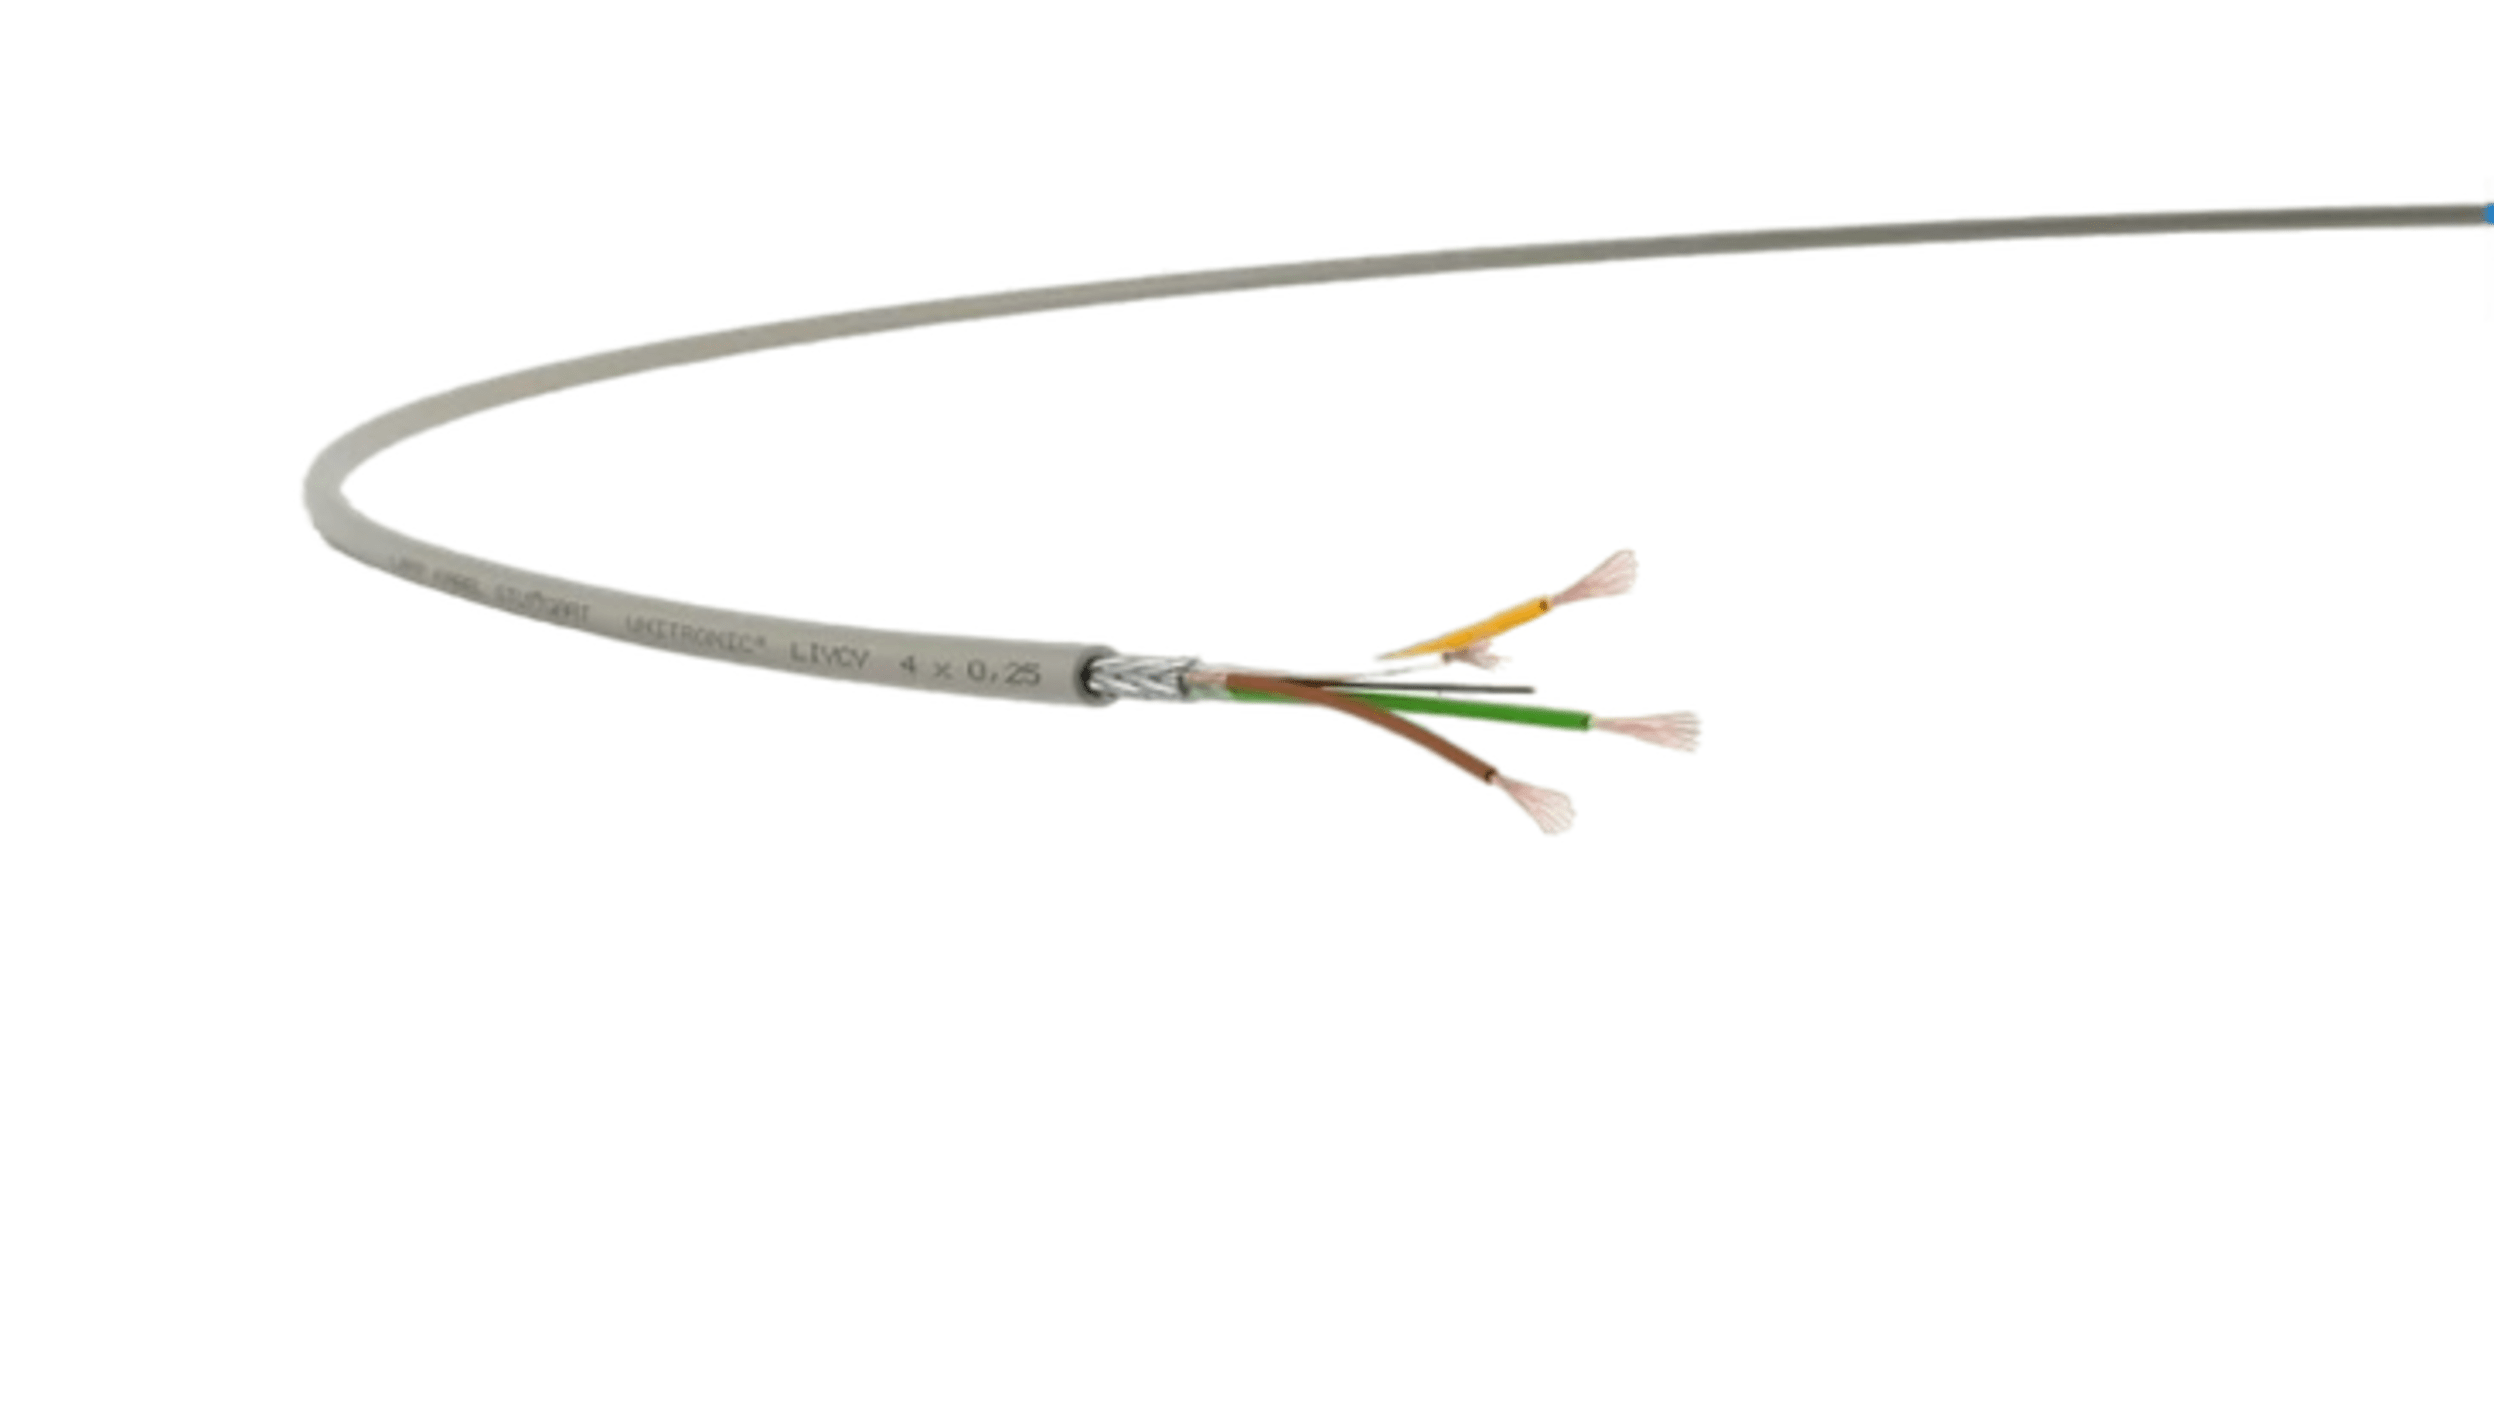 Lapp UNITRONIC LiYCY Control Cable 0.75 mm² 50m 18 AWG